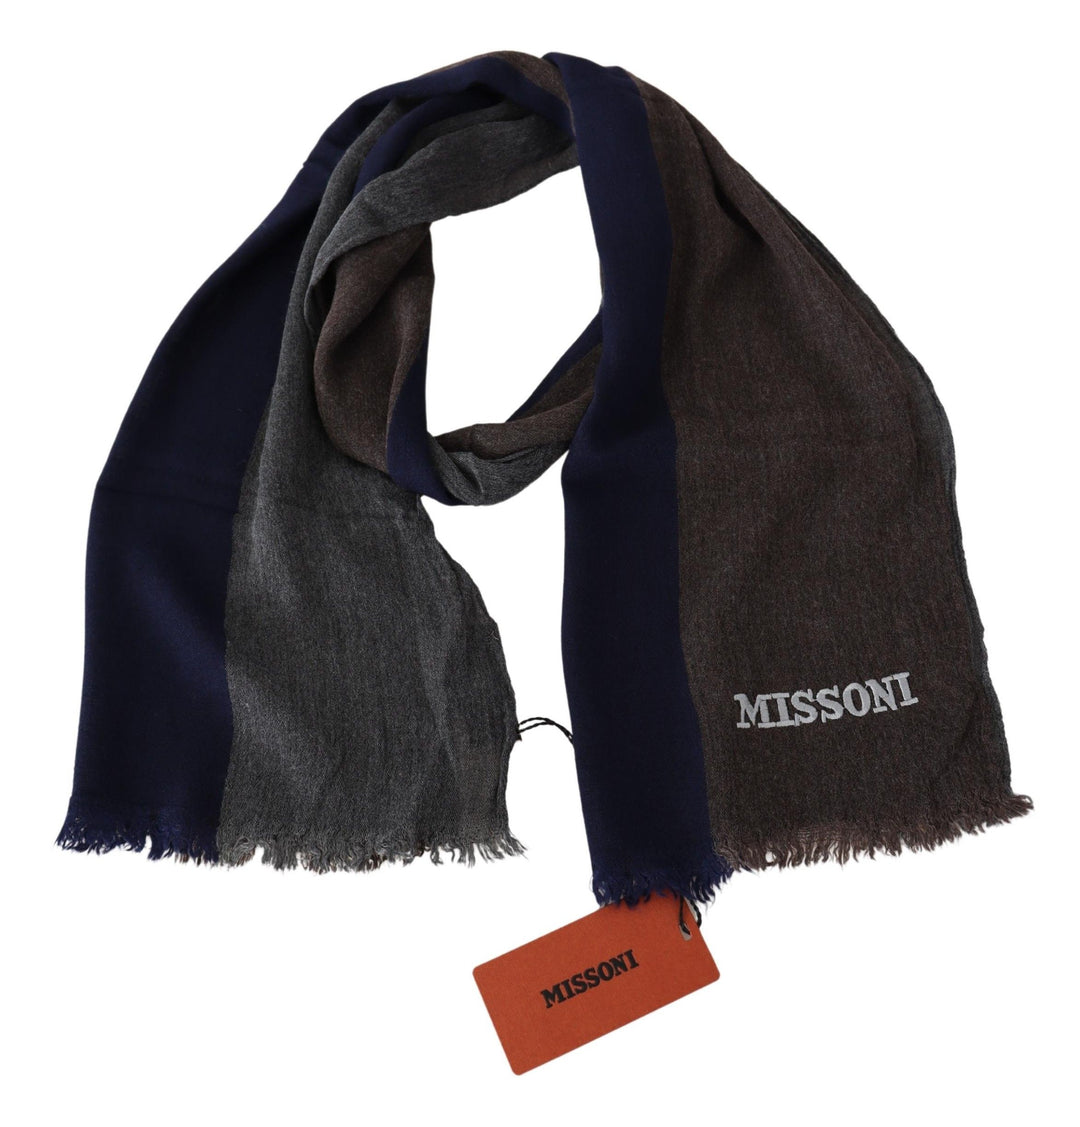 Missoni Elegant Multicolor Wool Scarf with Signature Embroidery